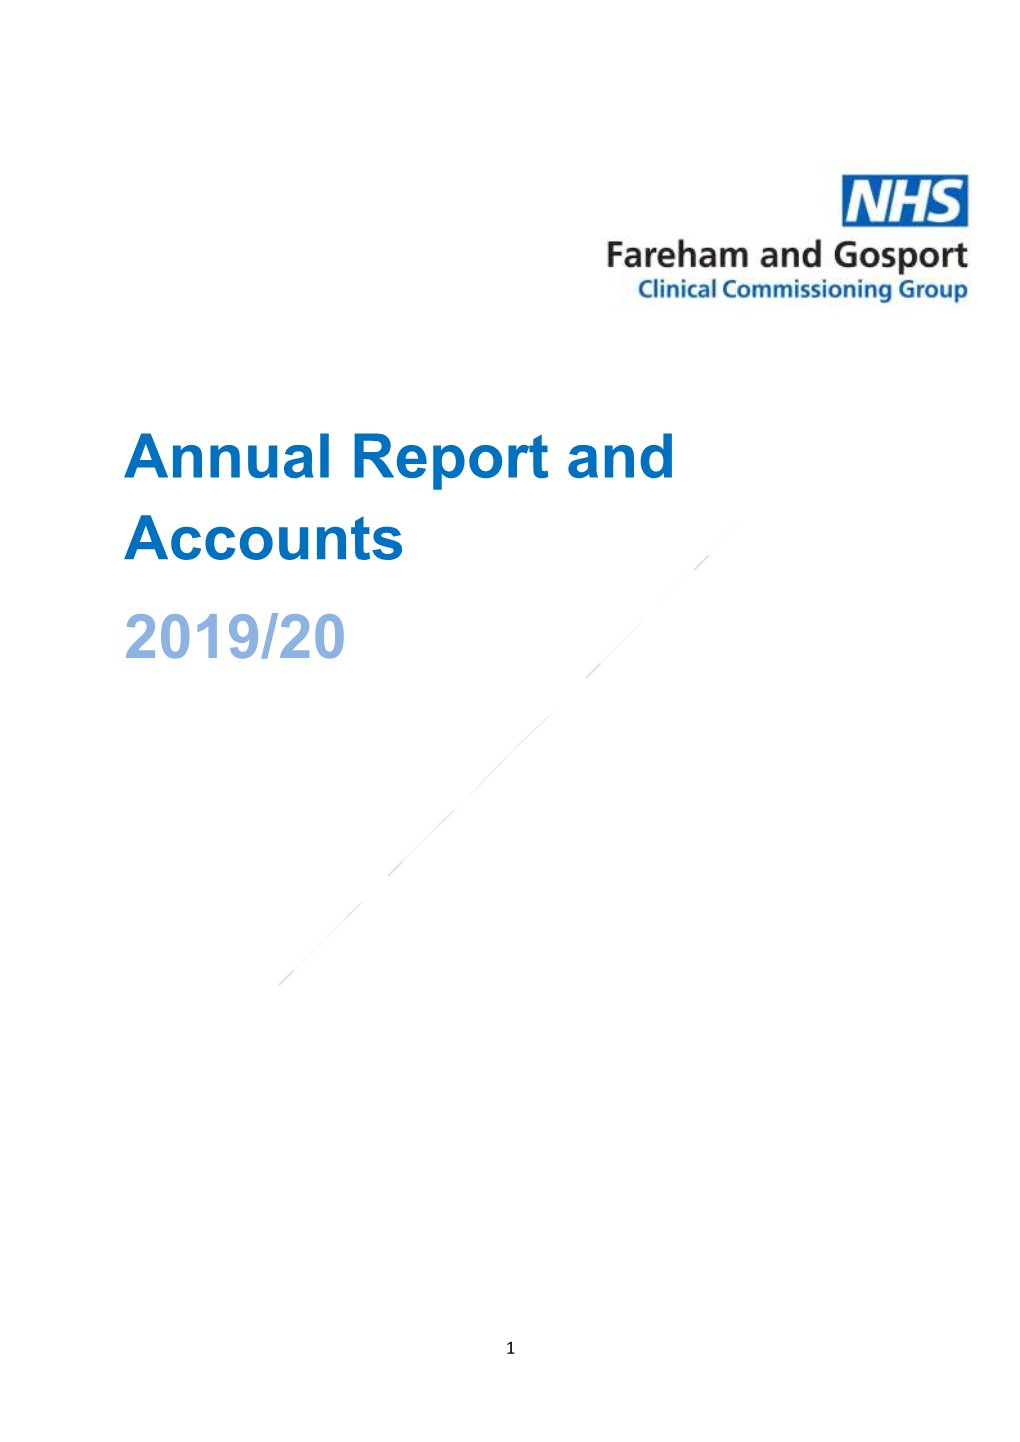 CCG Annual Reports and Accounts 2019/20